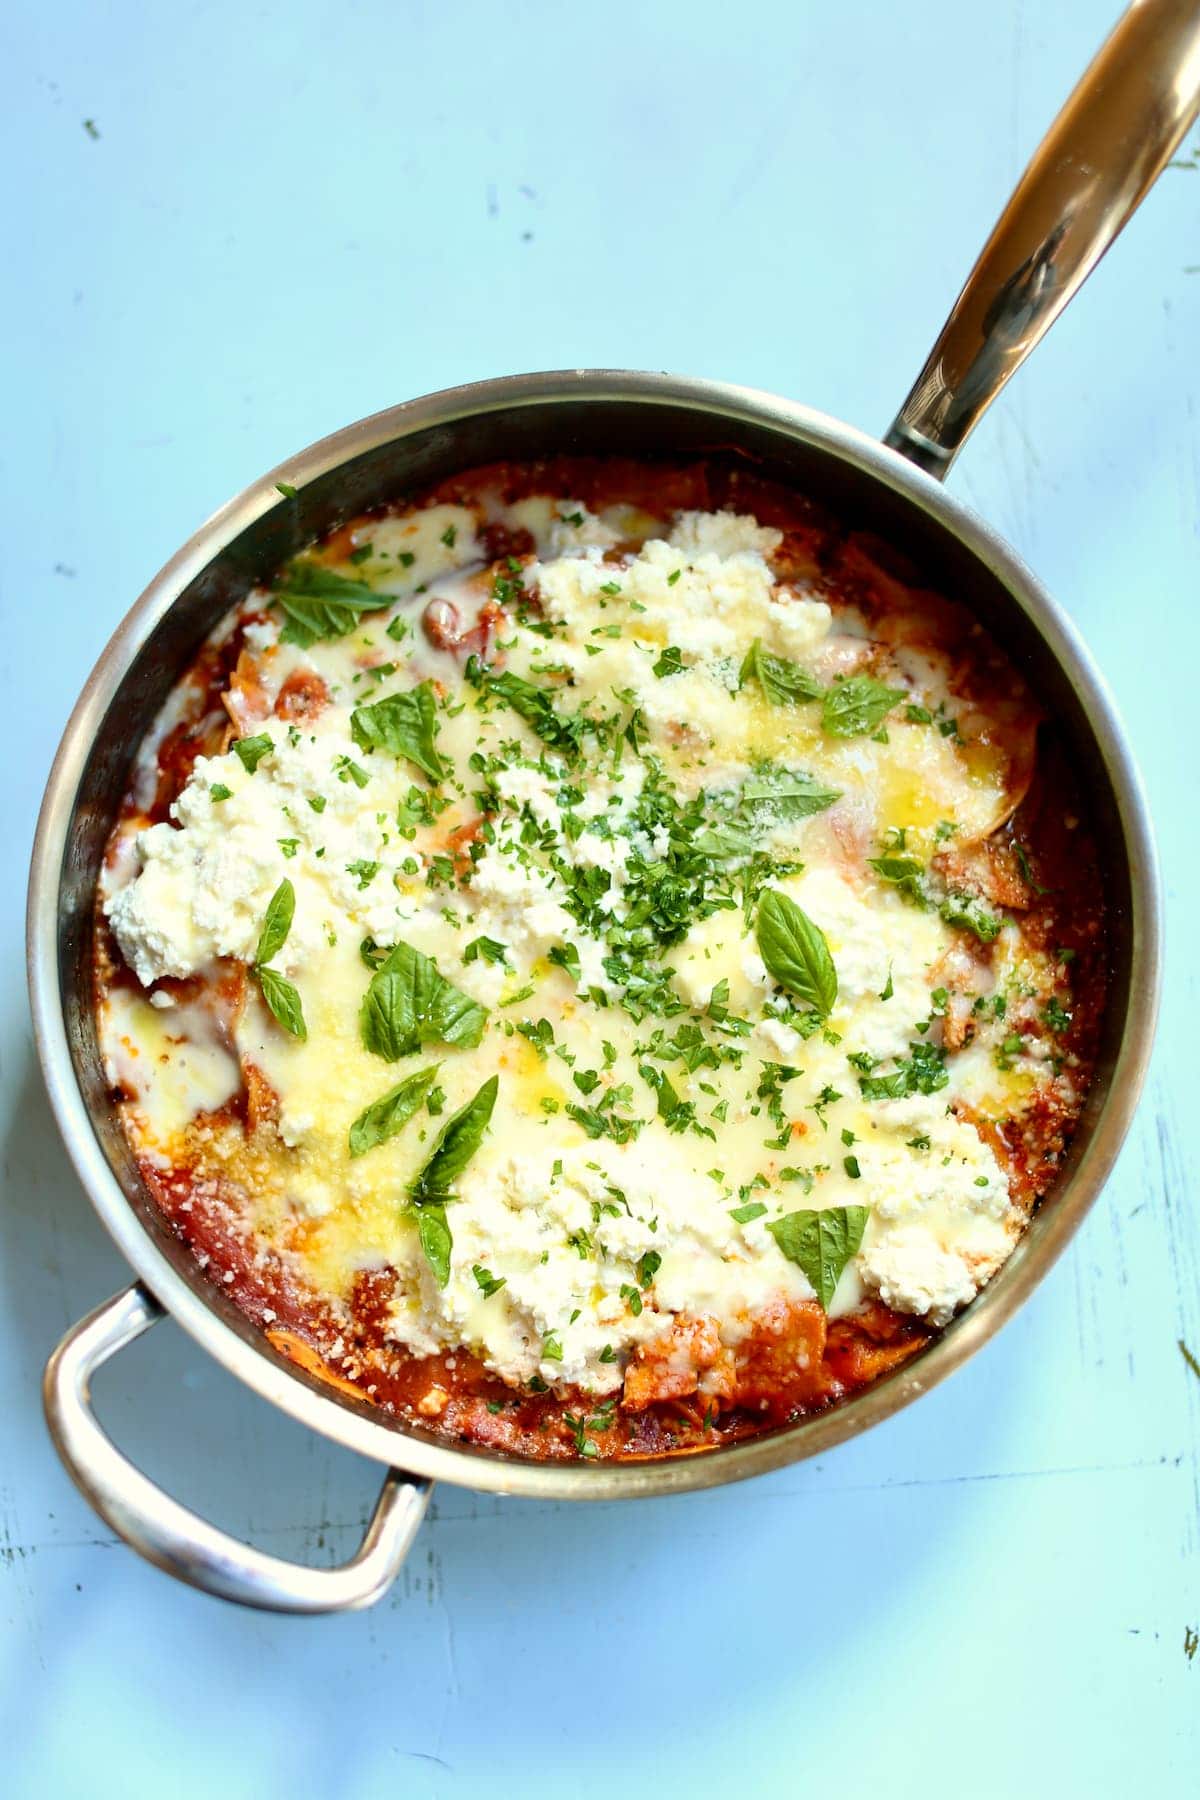 a skillet of pasta with red sauce and cheese.